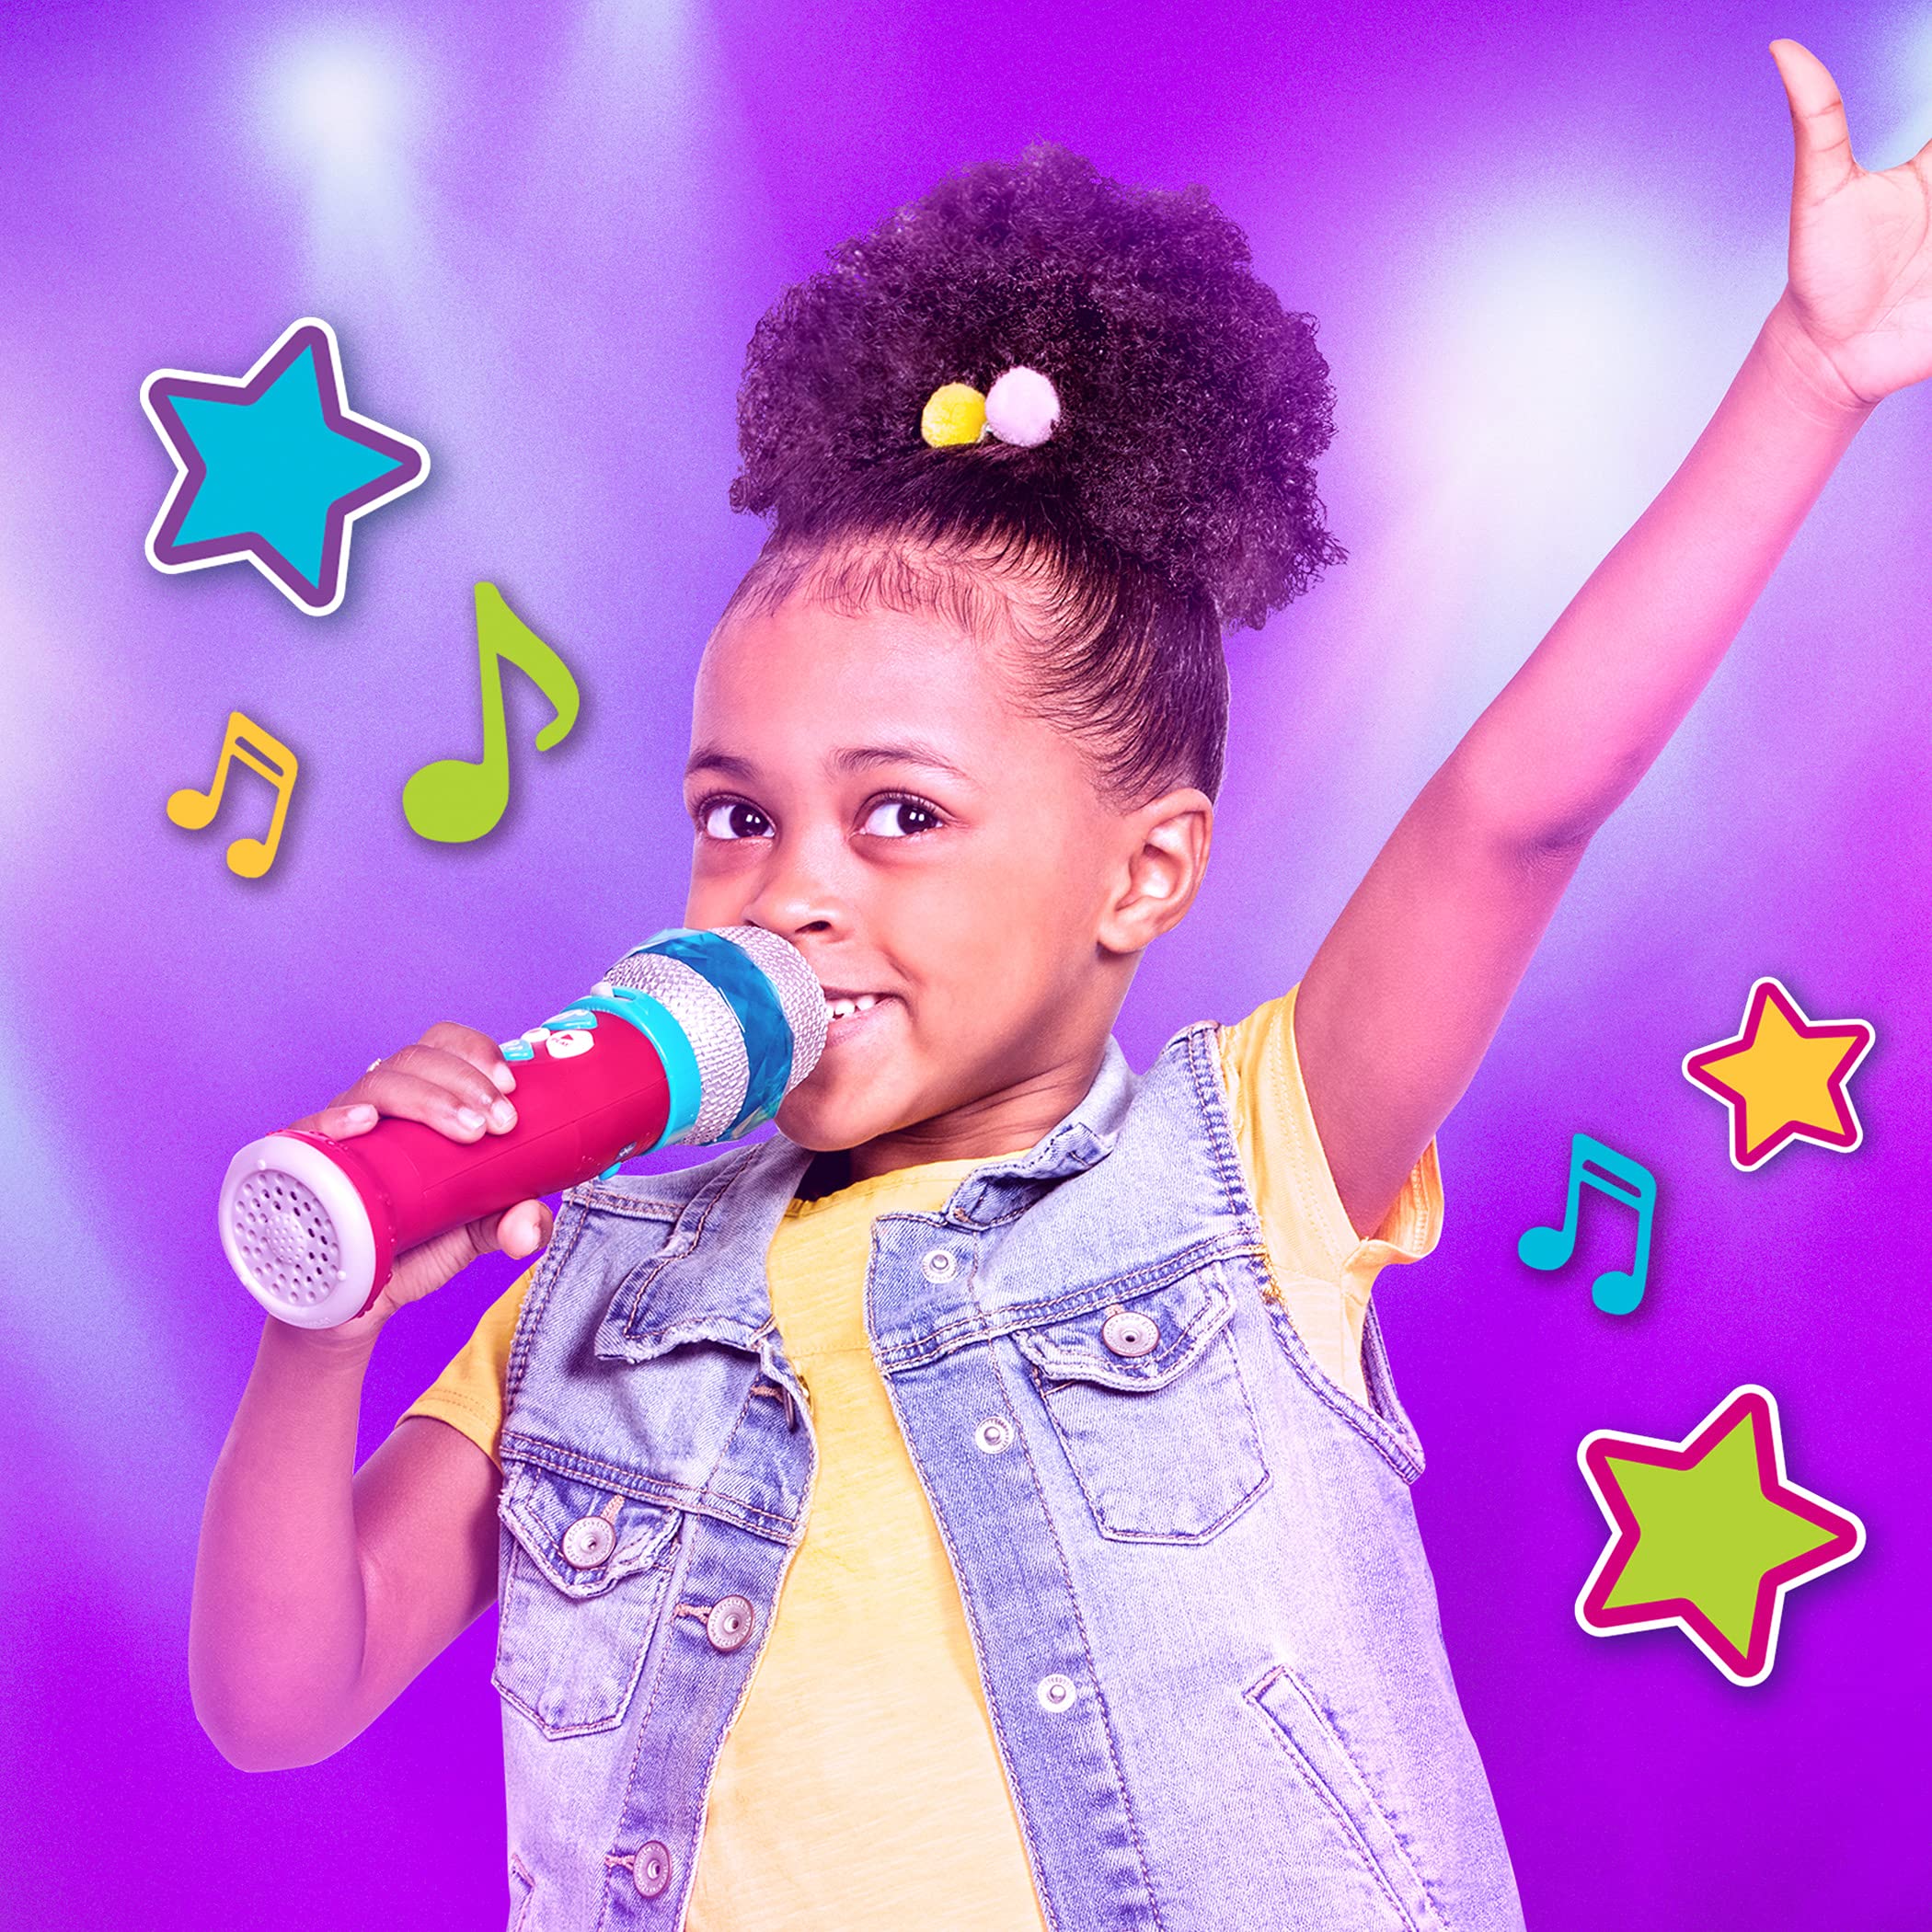 Battat – Musical Light Show Microphone – Light-Up Sing-Along Mic with 5 Songs and Record Functions for Kids 2 Years + (Bluetooth)